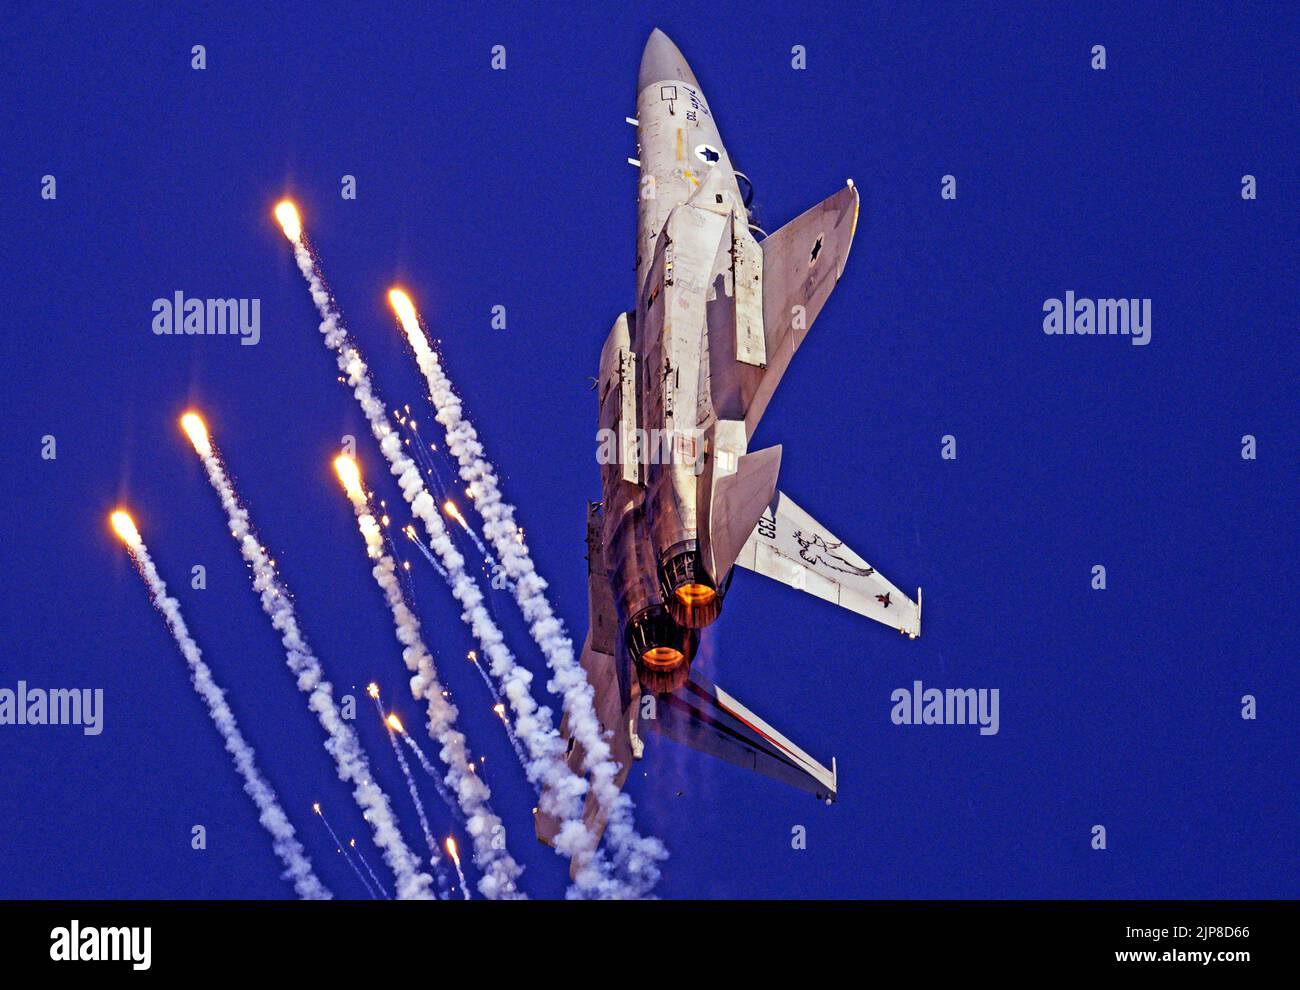 Israeli Air force (IAF) F-15 (Baz) Fighter jet in flight with anti aircraft defensive flares Stock Photo